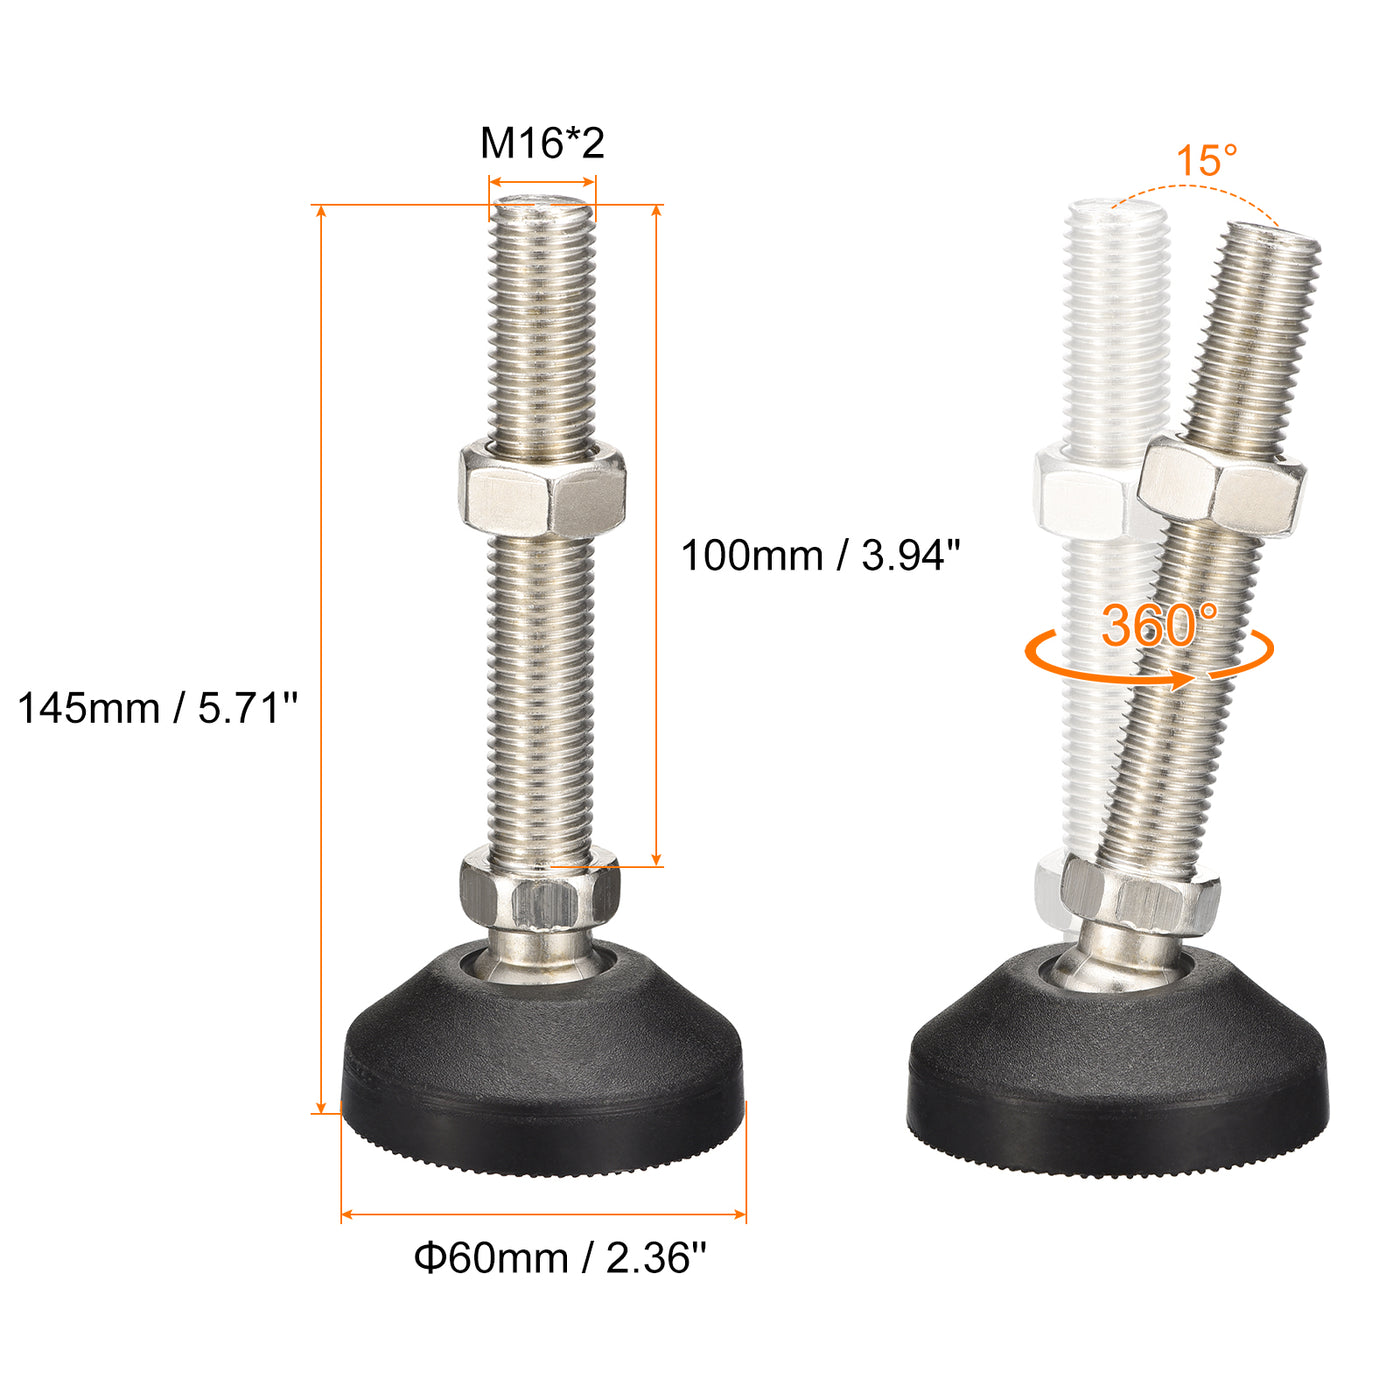 uxcell Uxcell Furniture Levelers, 1Pcs M16x100x60mm Nylon Universal Leveling Feet, Adjustable Swivel Table Feet for Furniture Workshop Machines Machinery Equipment